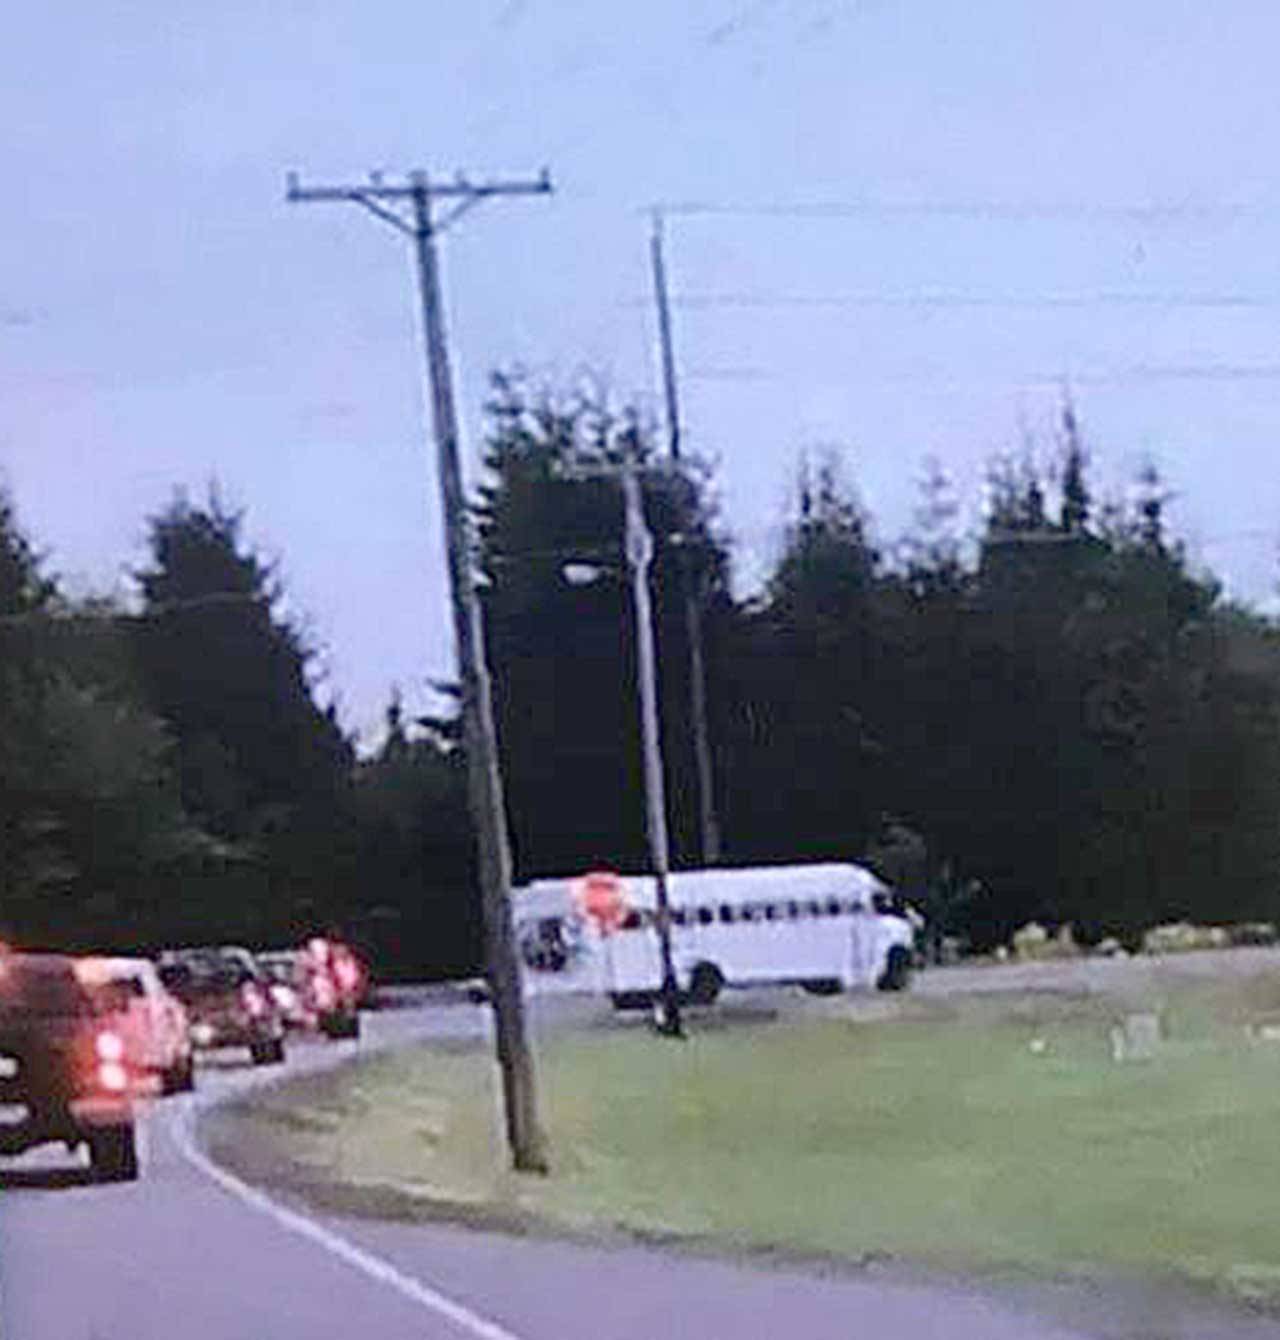 The Clallam County Sheriff’s Office is investigating video in an attempt to identify vehicles and people who may have harassed a family in Forks last week. The multiracial family was traveling in a white school bus as seen in this surveillance video image. (Clallam County Sheriff’s Office)